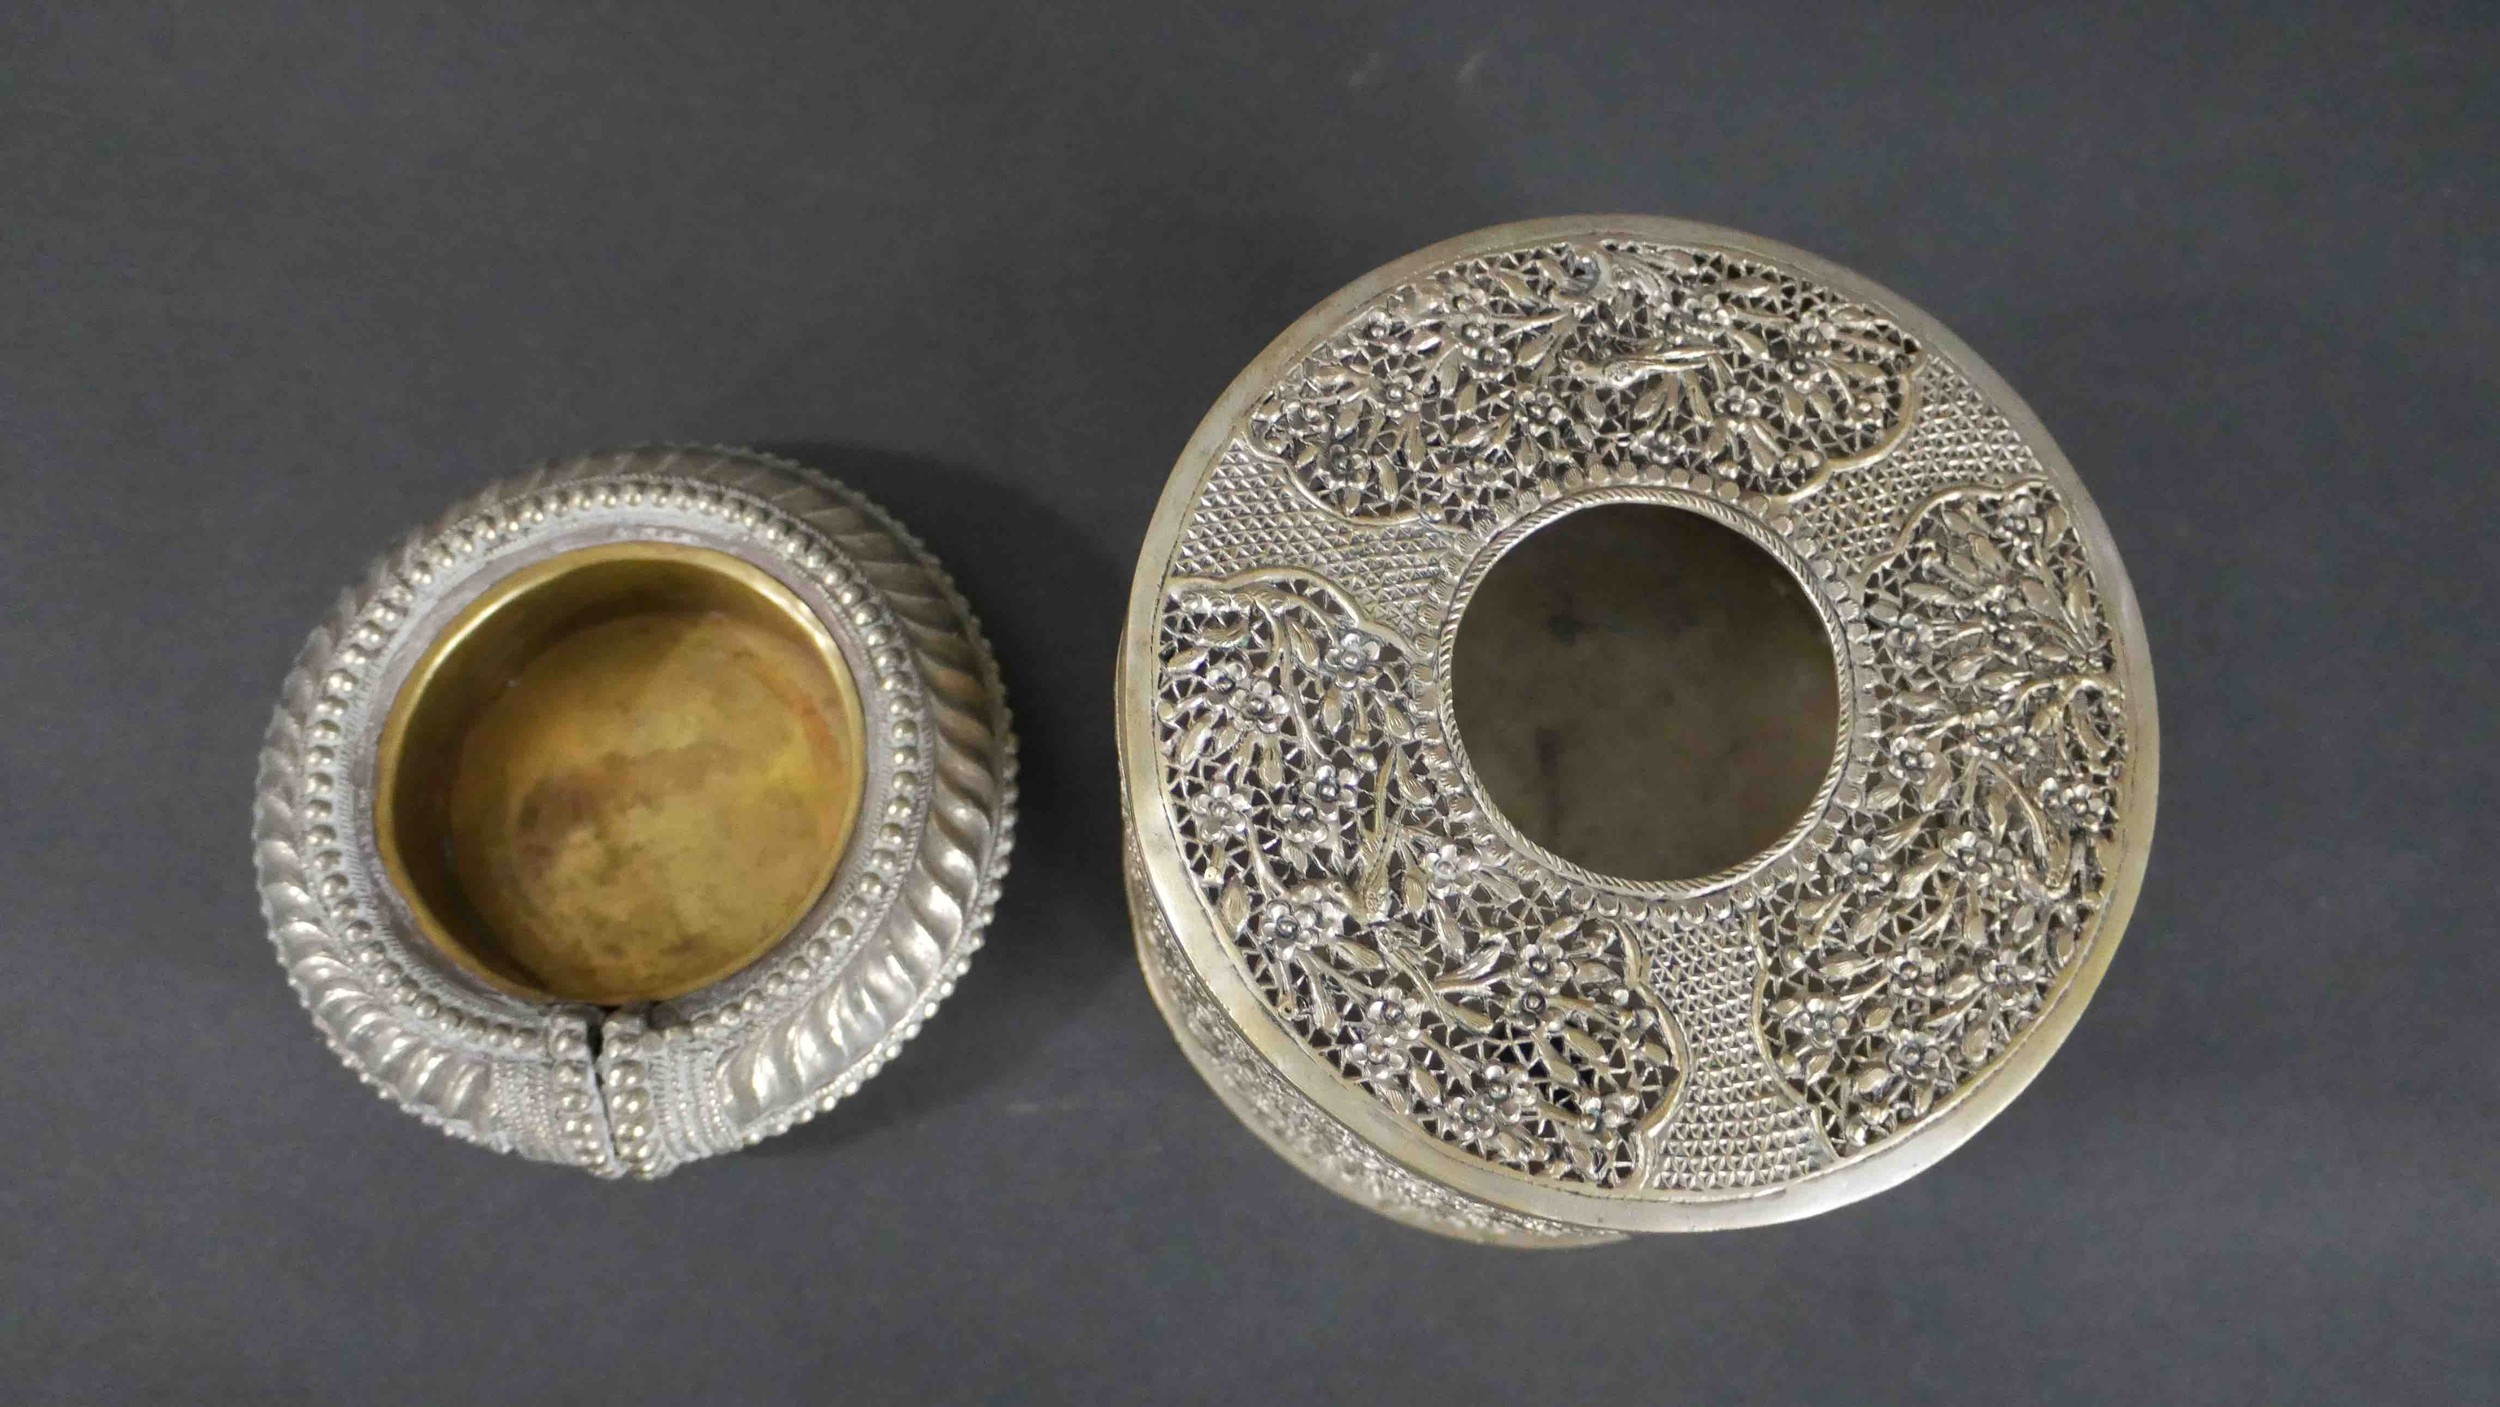 An Oriental pierced silver plate bird and blossom design cover and base along with an Indian brass - Image 5 of 5